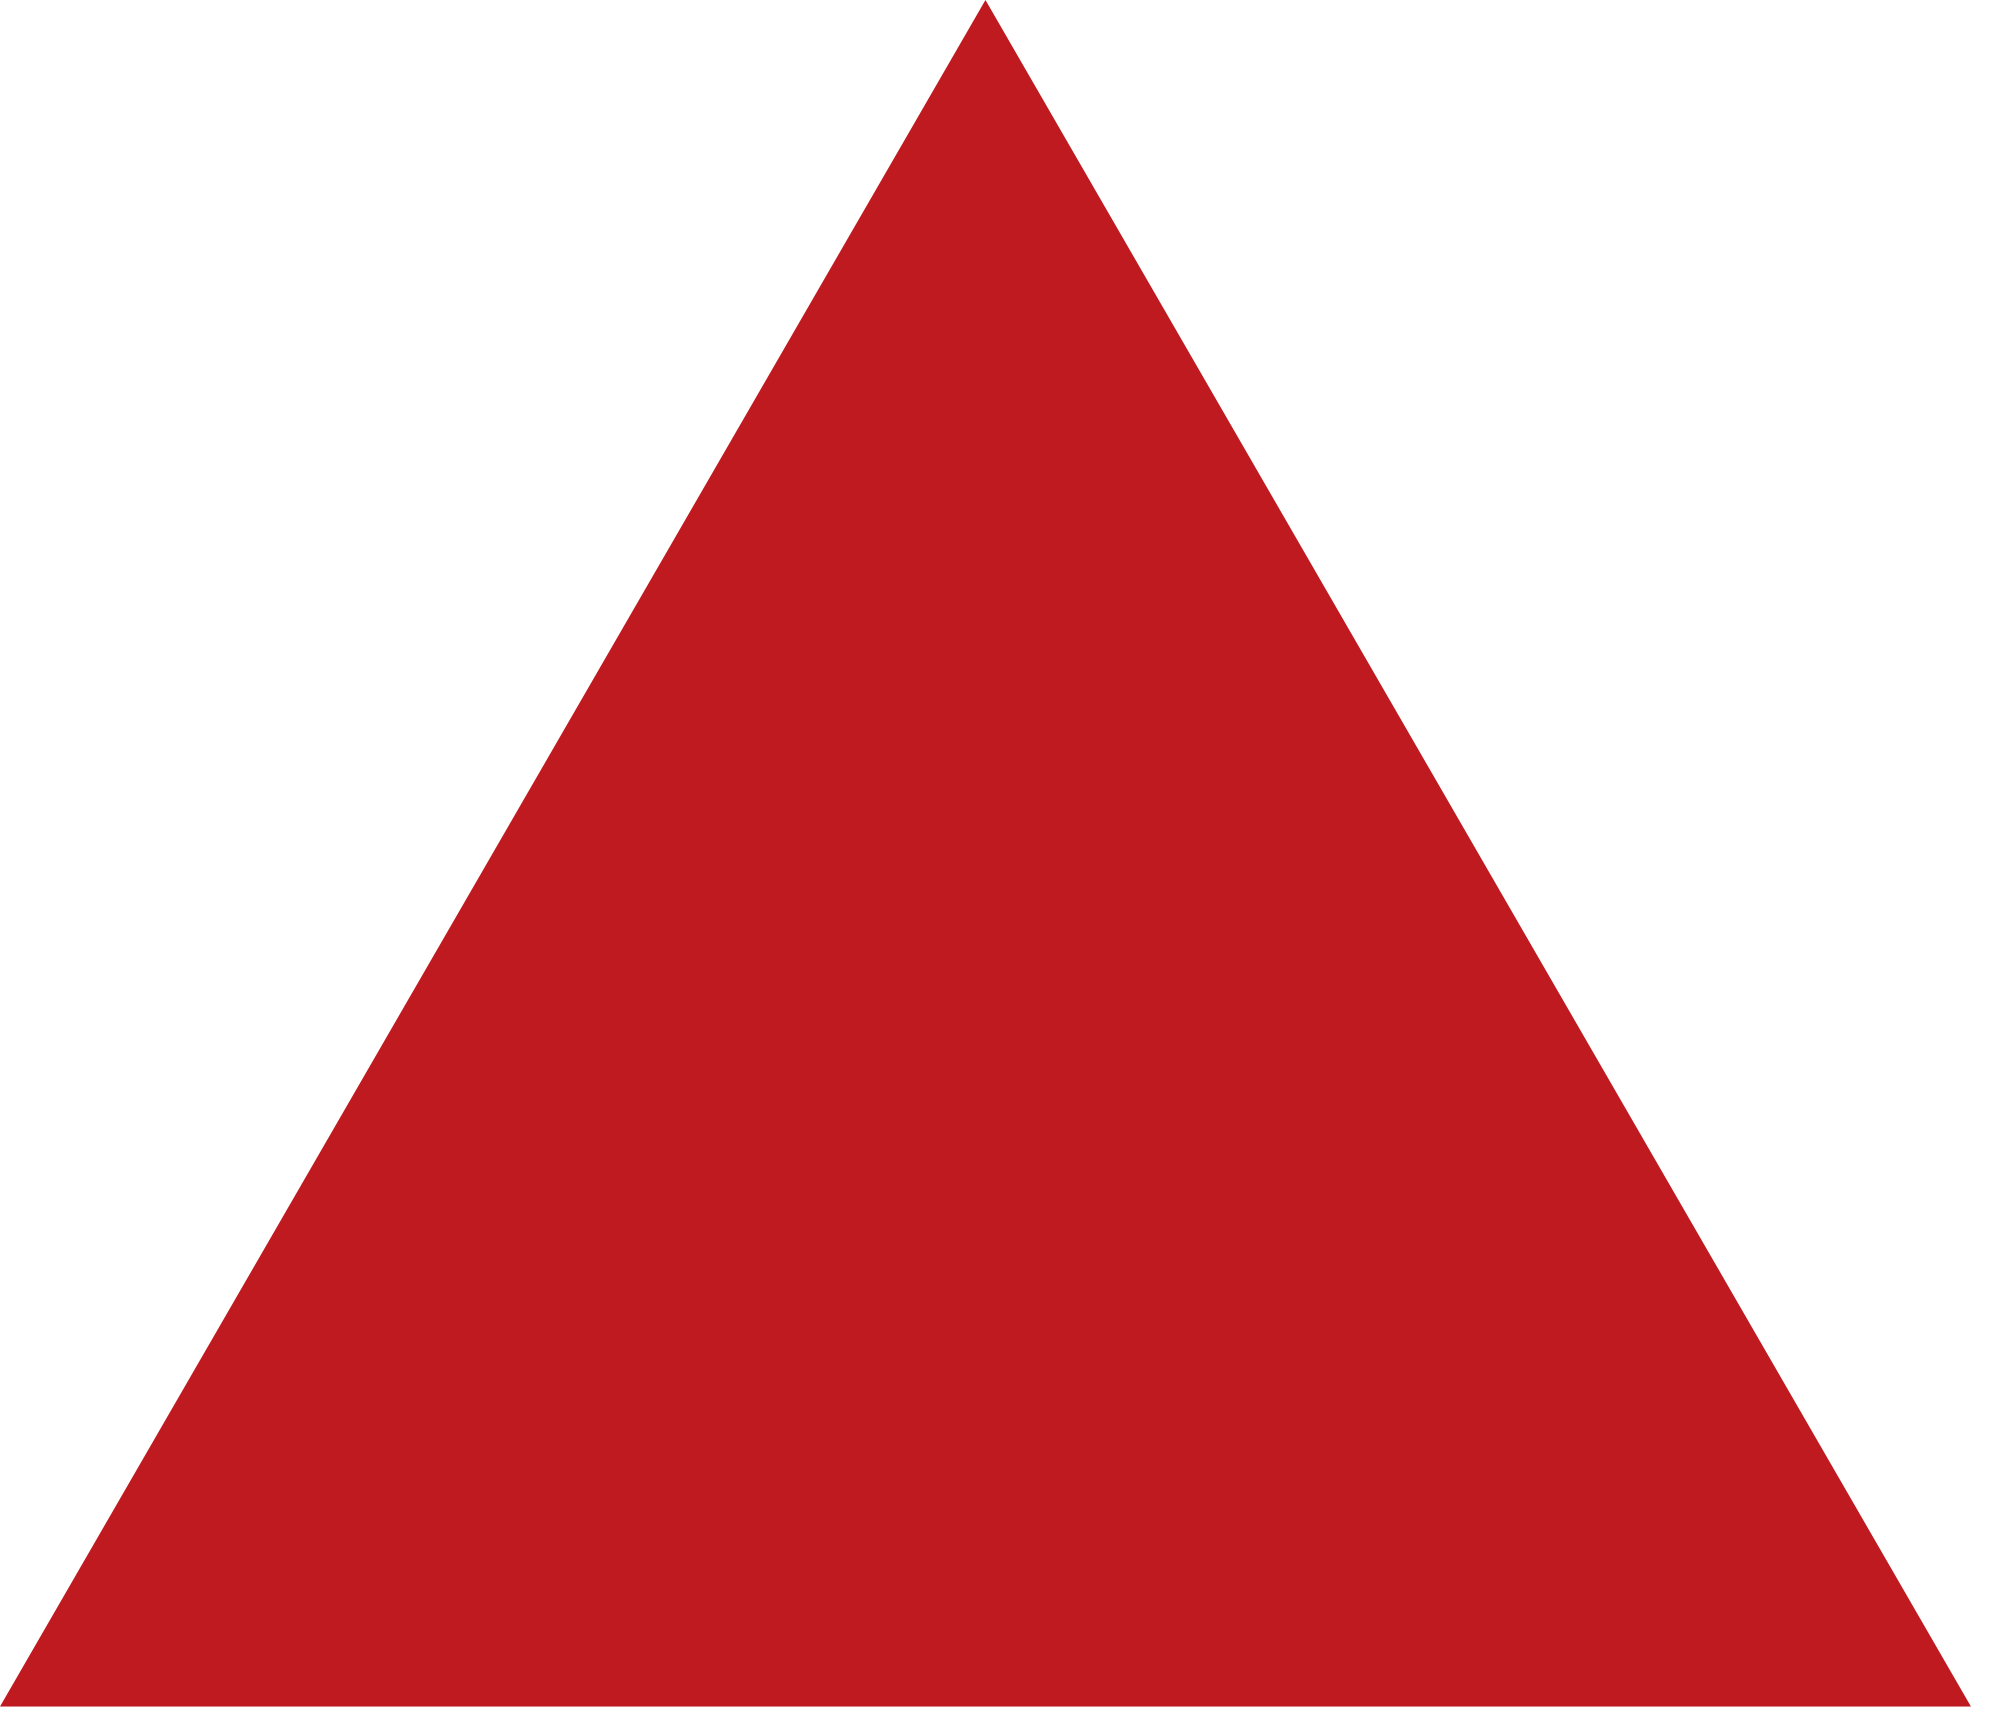 Triangular equilateral triangle